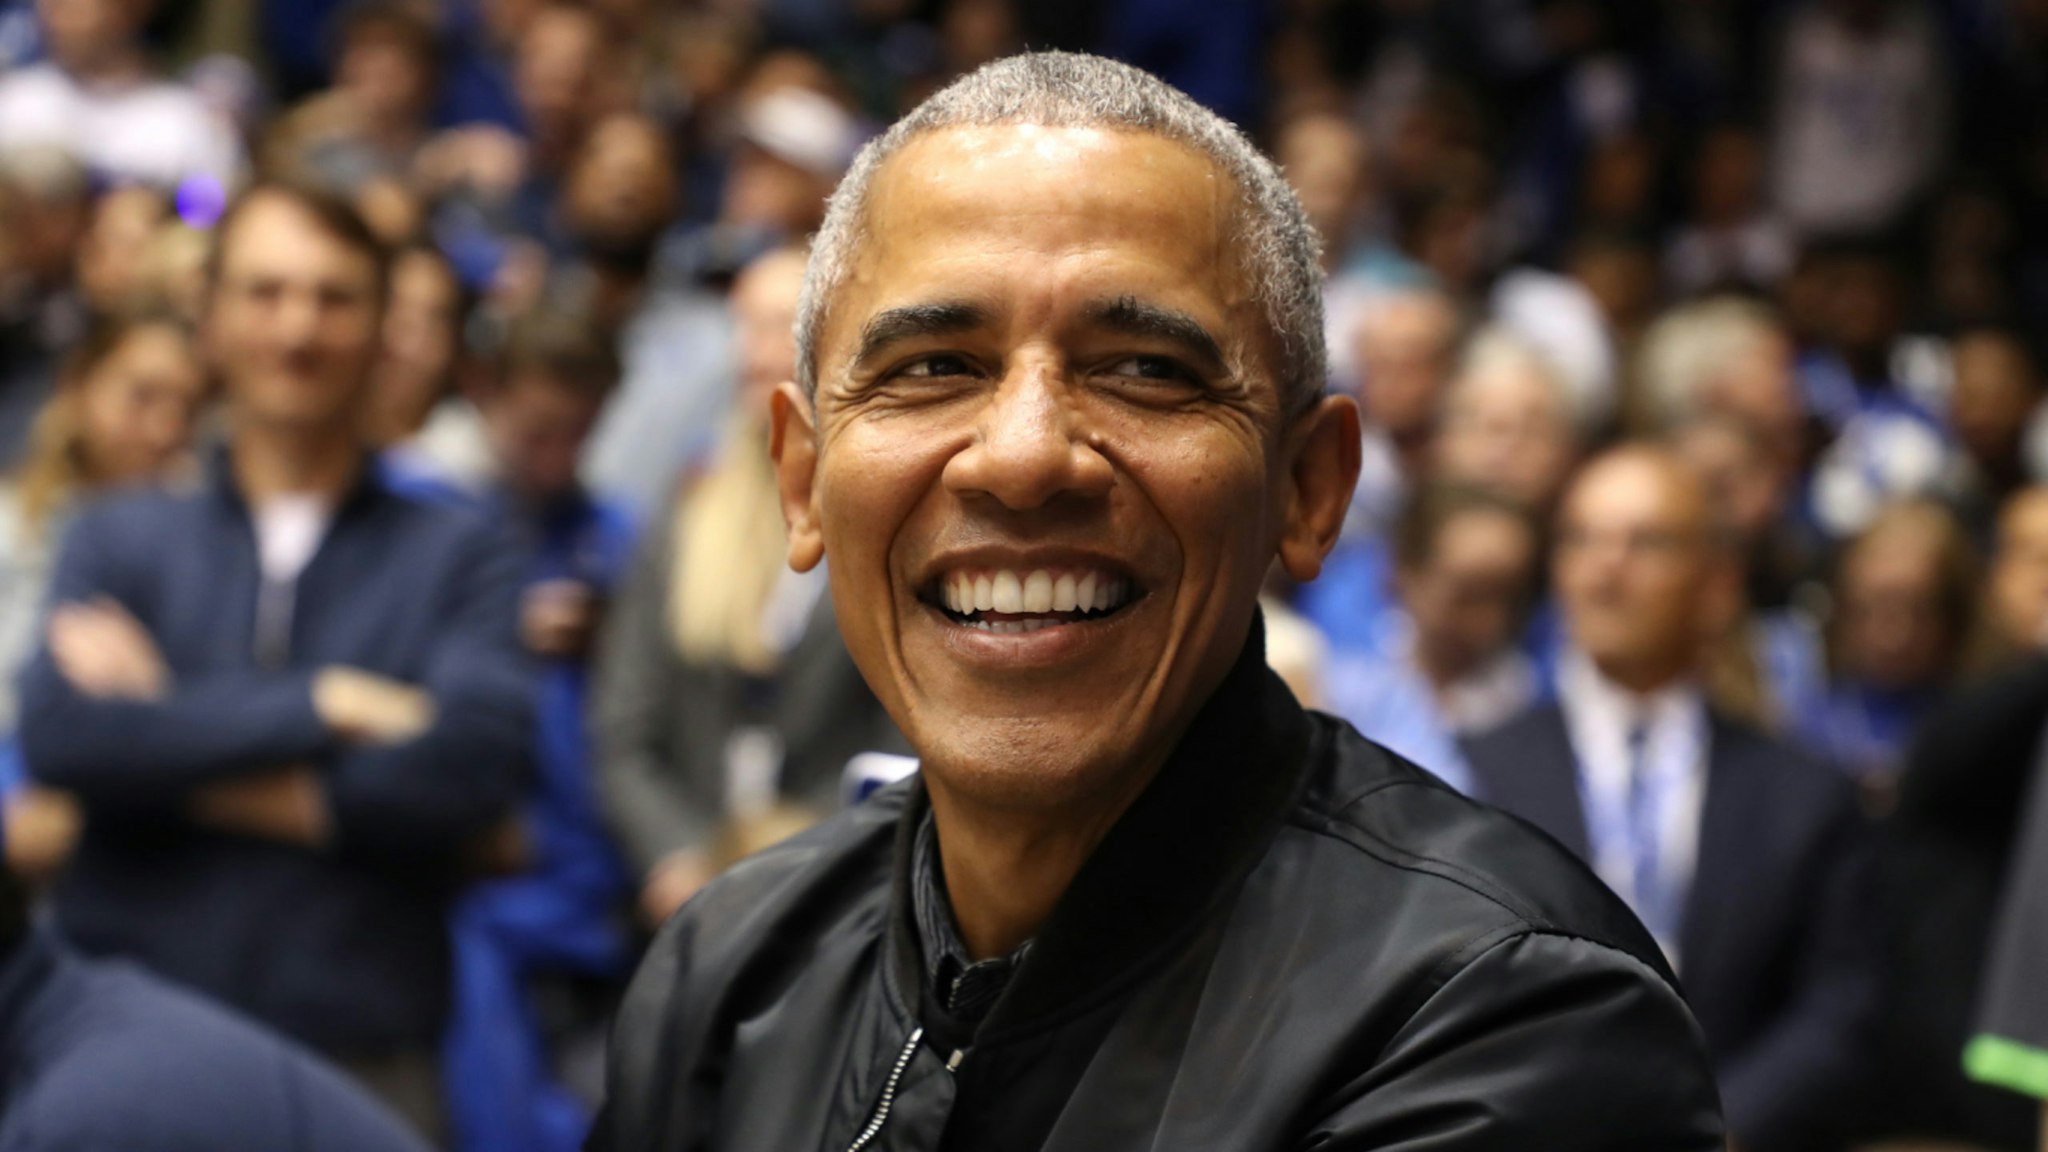 Former President of the United States, Barack Obama, watches on during the game between the North Carolina Tar Heels and Duke Blue Devils at Cameron Indoor Stadium on February 20, 2019 in Durham, North Carolina.